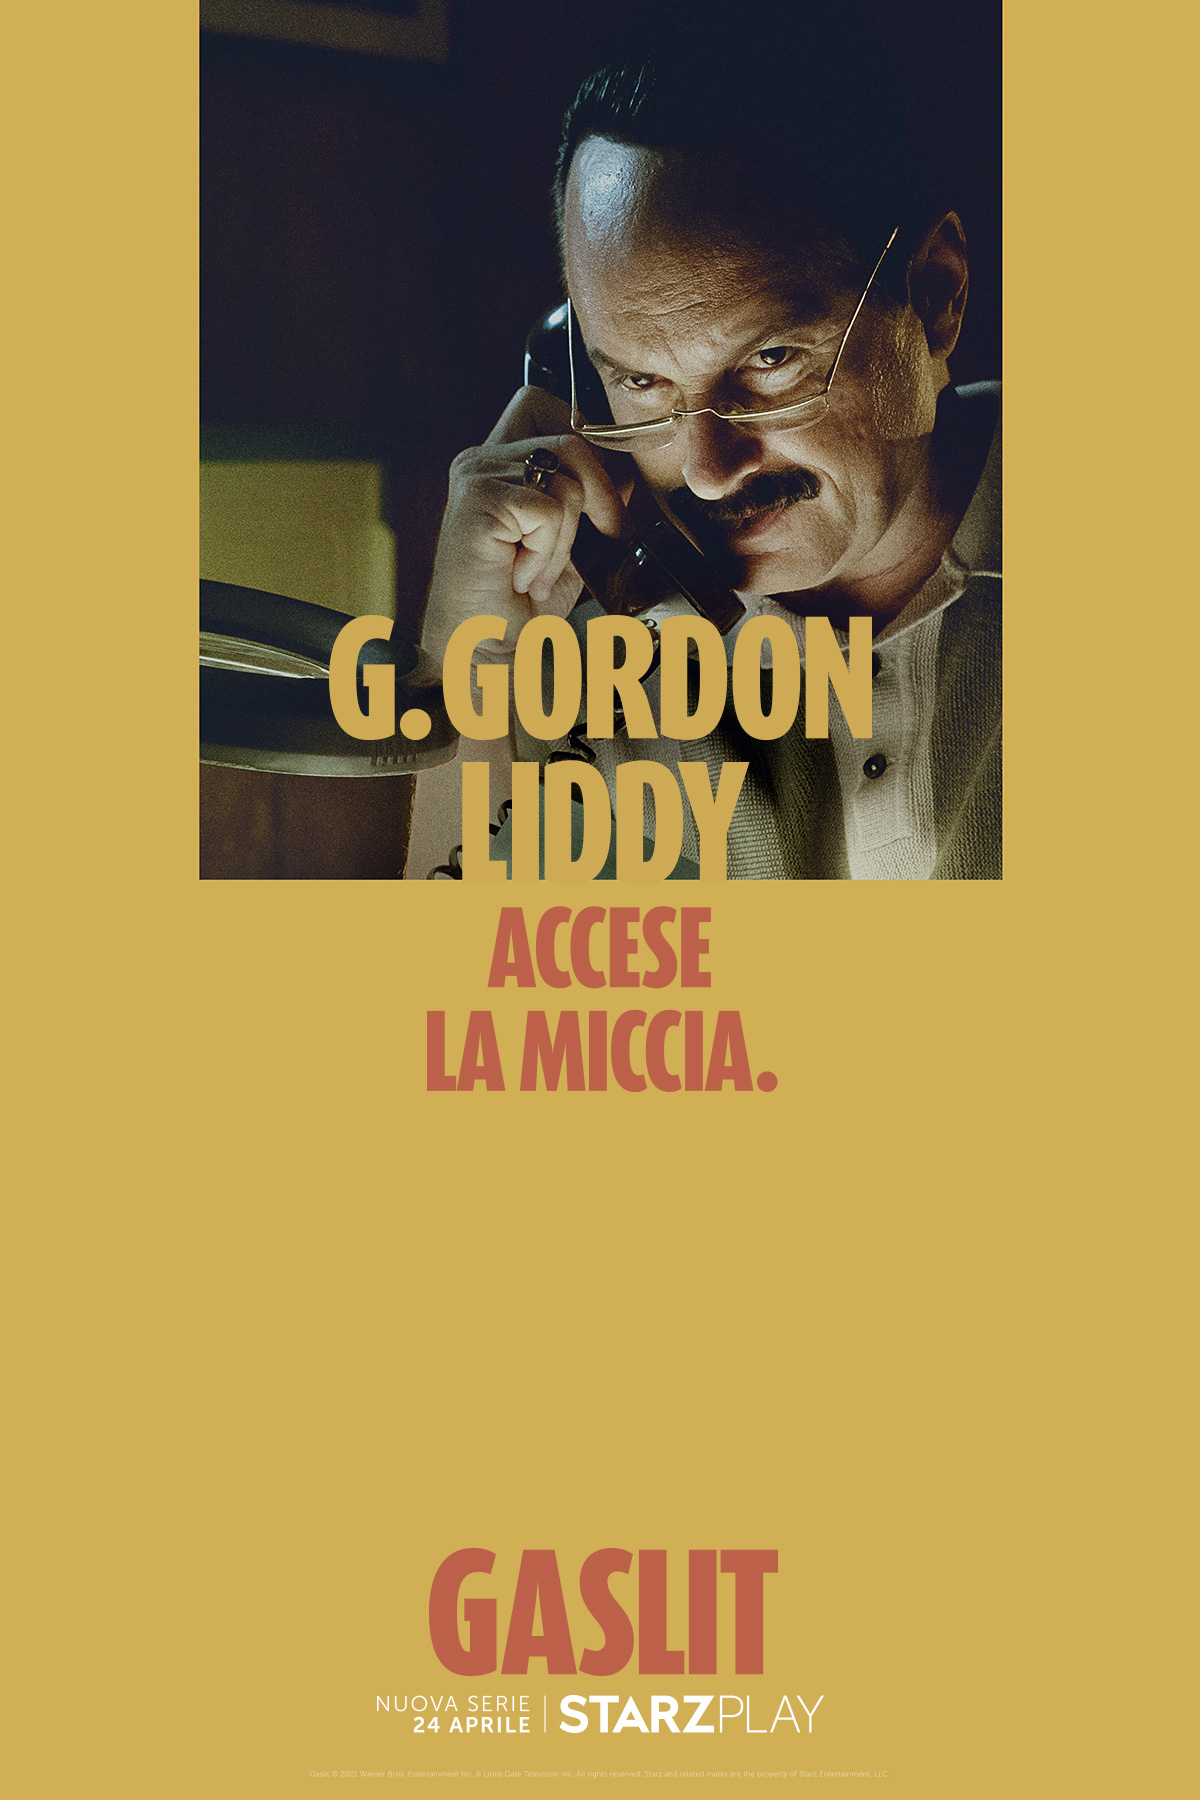 Character Poster G. Gordon Liddy [credit: The Refinery Agency; Copyright 2021 Warner Bros. Entertainment Inc. and Lions Gate Television Inc. All rights reserved. Artwork Copyright Starz Entertainment, LLC.]